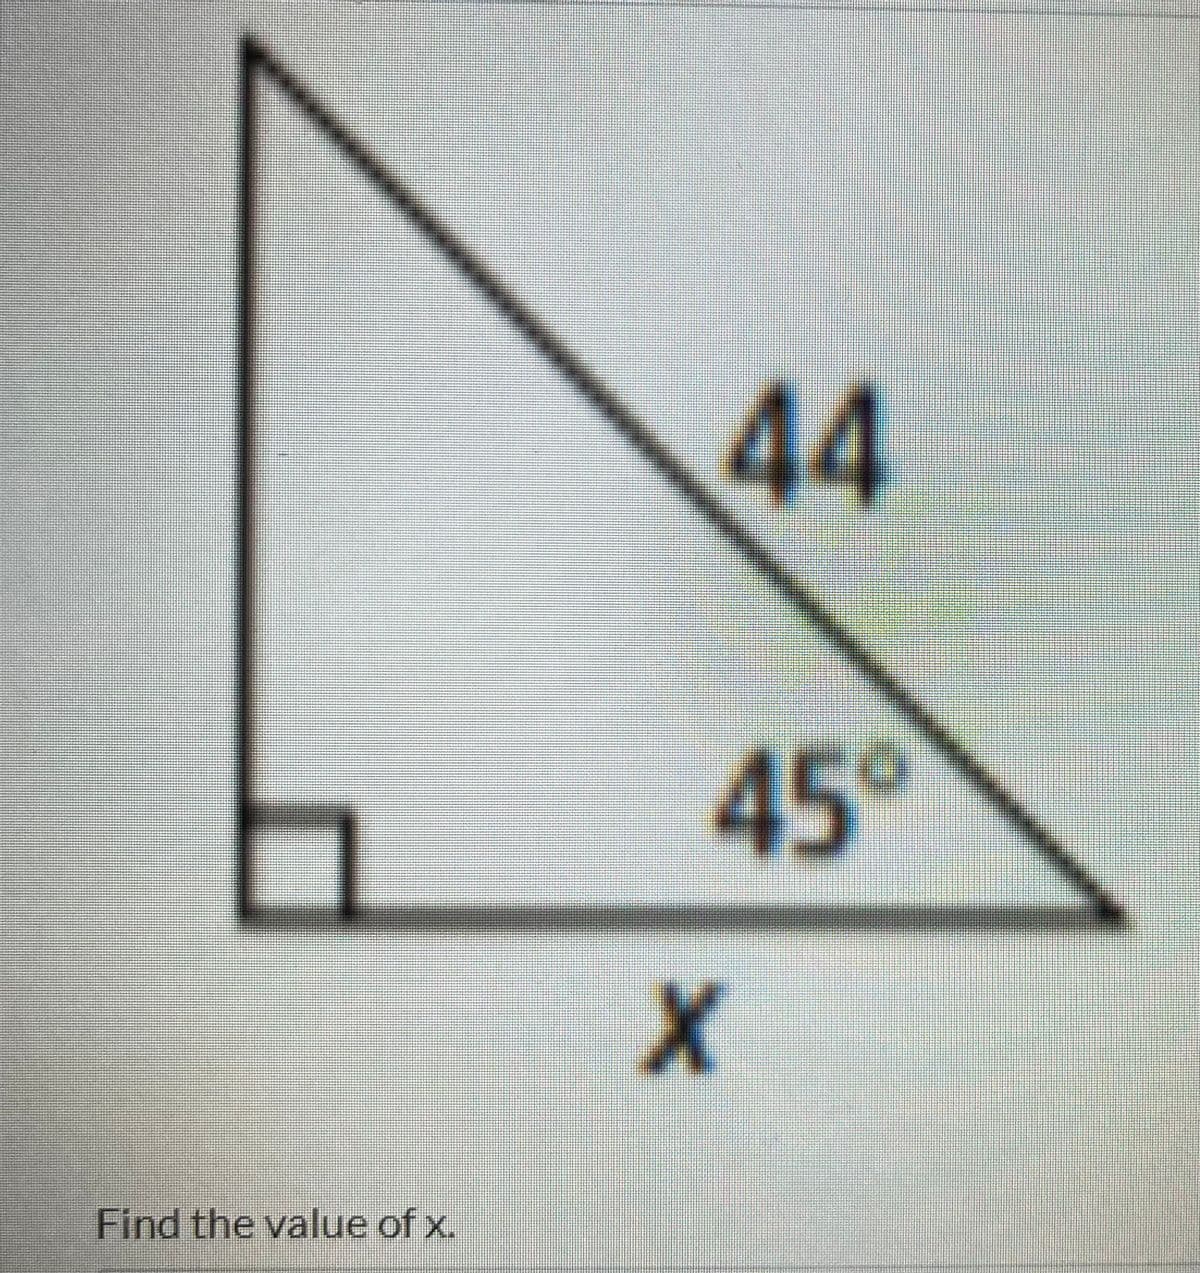 44
45°
Find the value of x.
